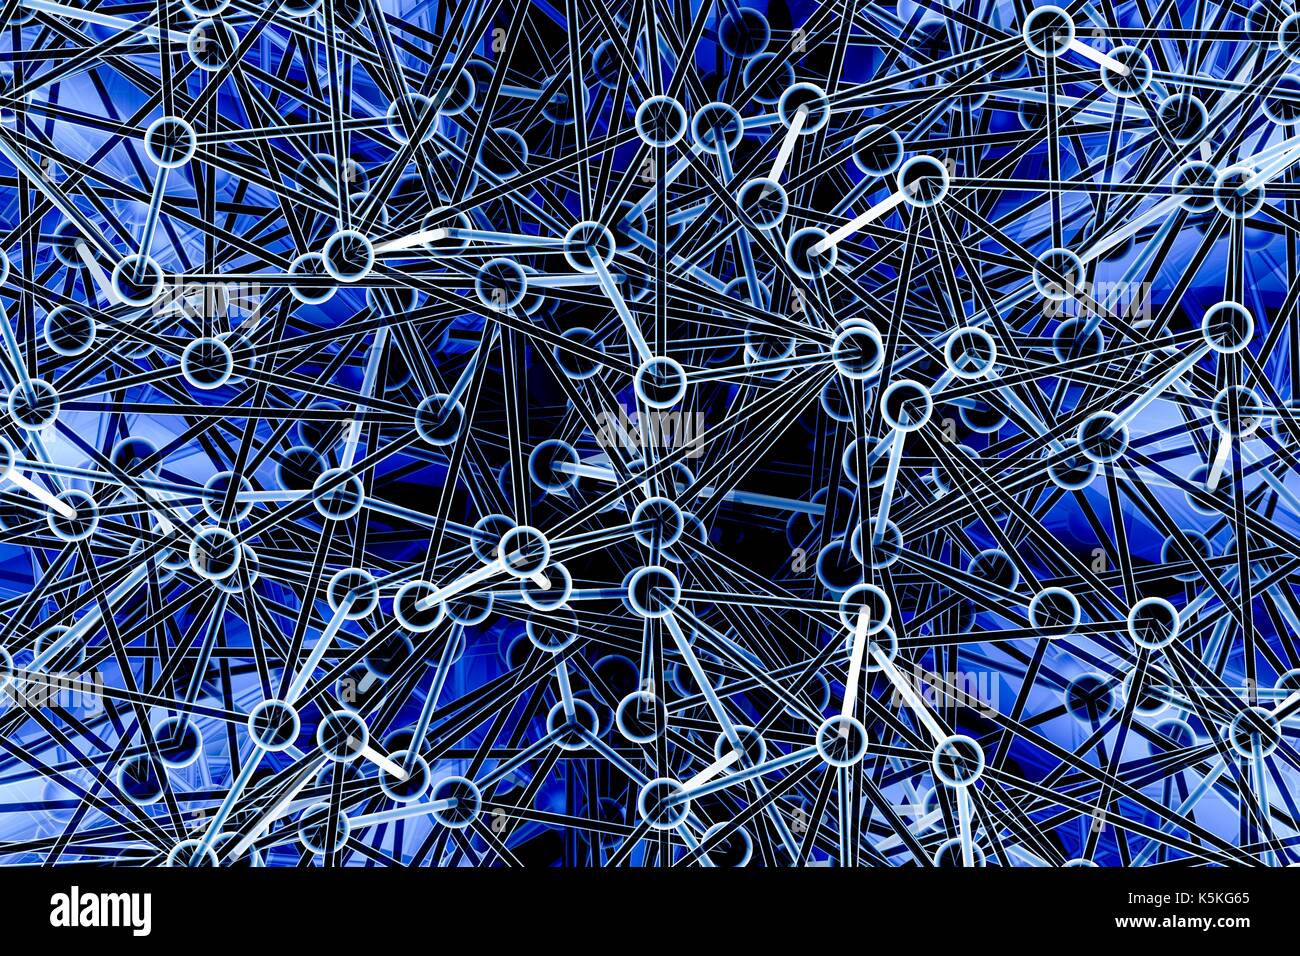 Abstract illustration of a molecular structure or network. Stock Photo